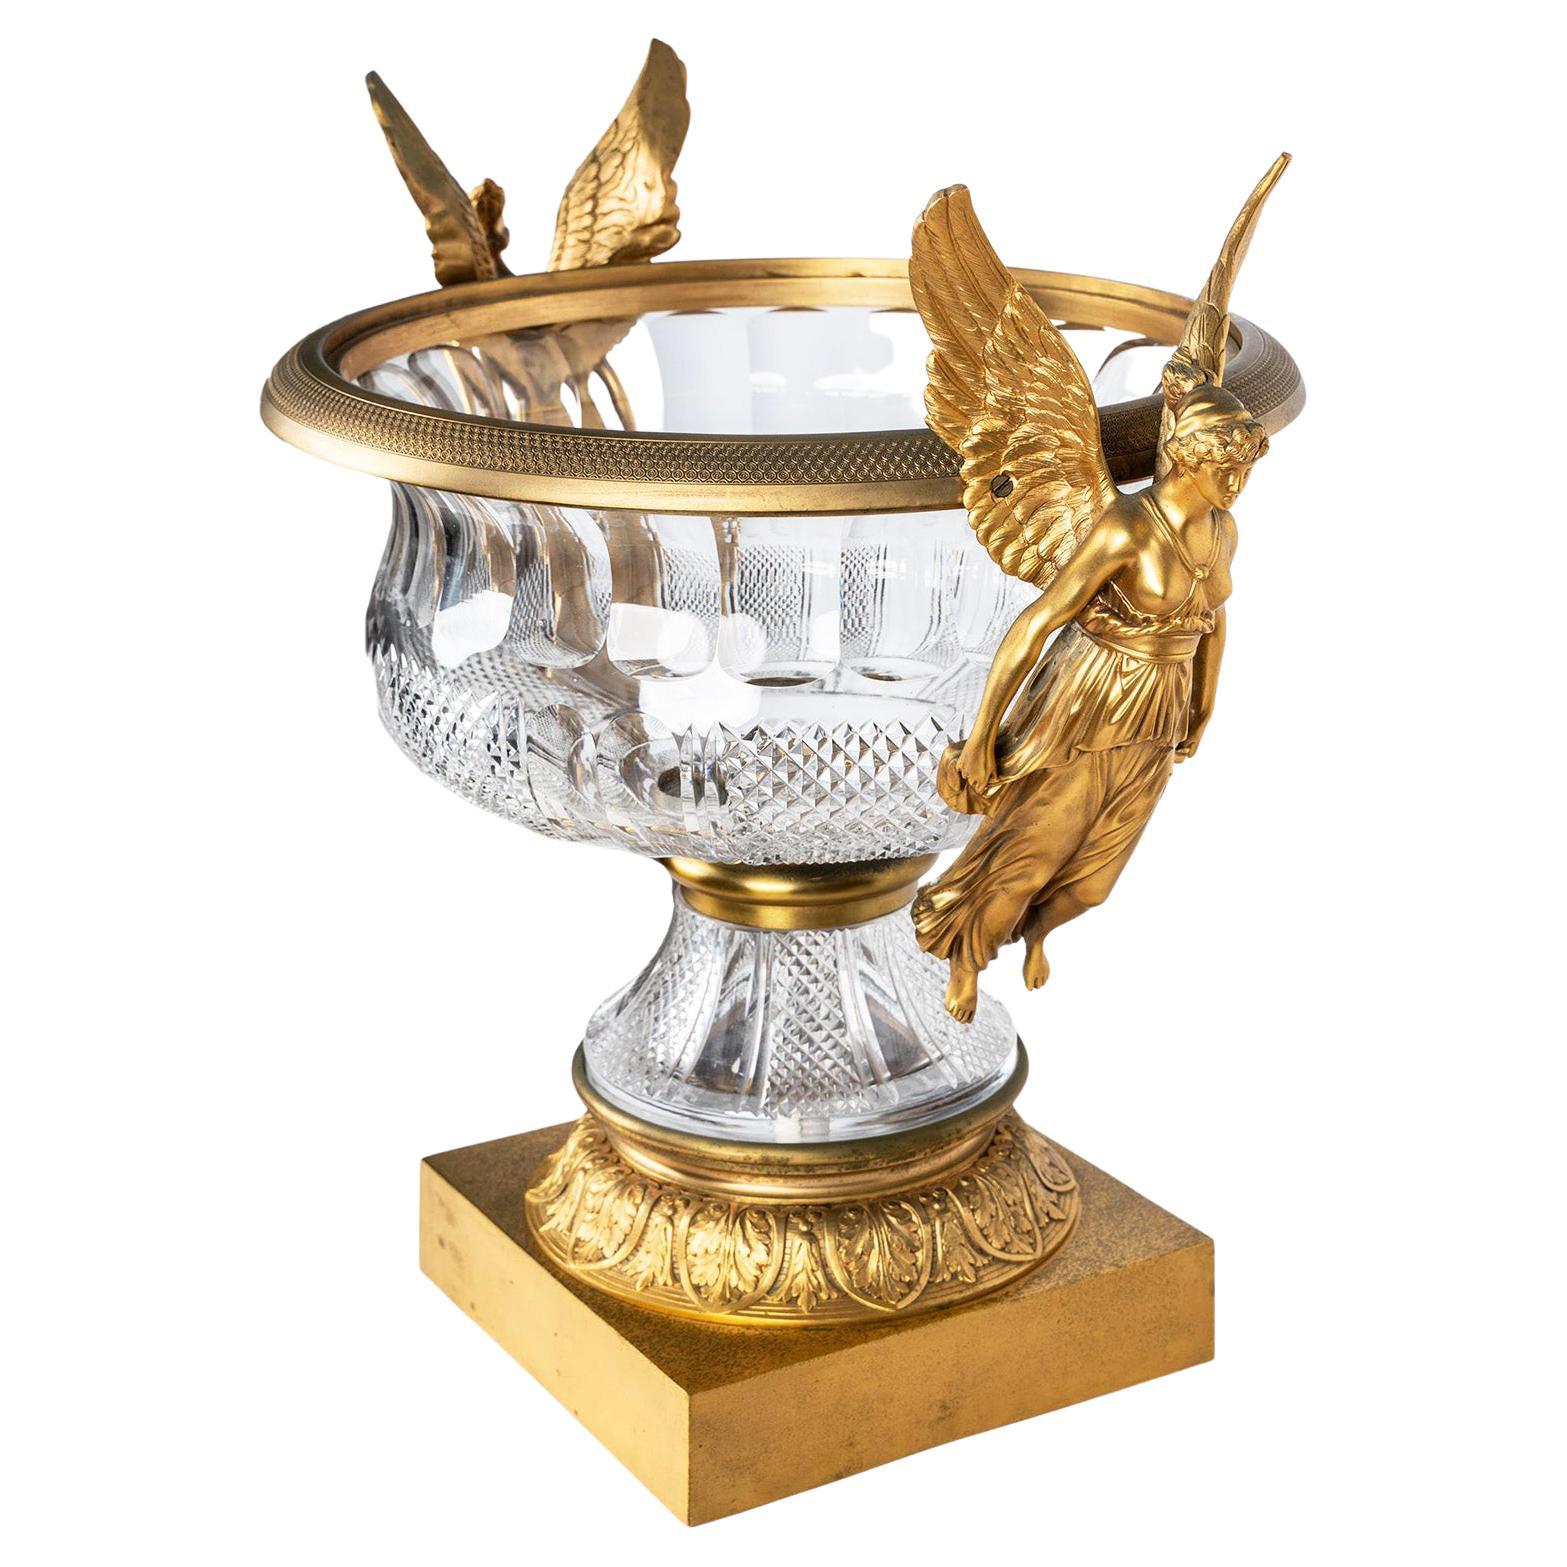 Large Empire Style Gilt-Bronze and Cut-Glass 'Grande Coupe' Urn Centerpiece